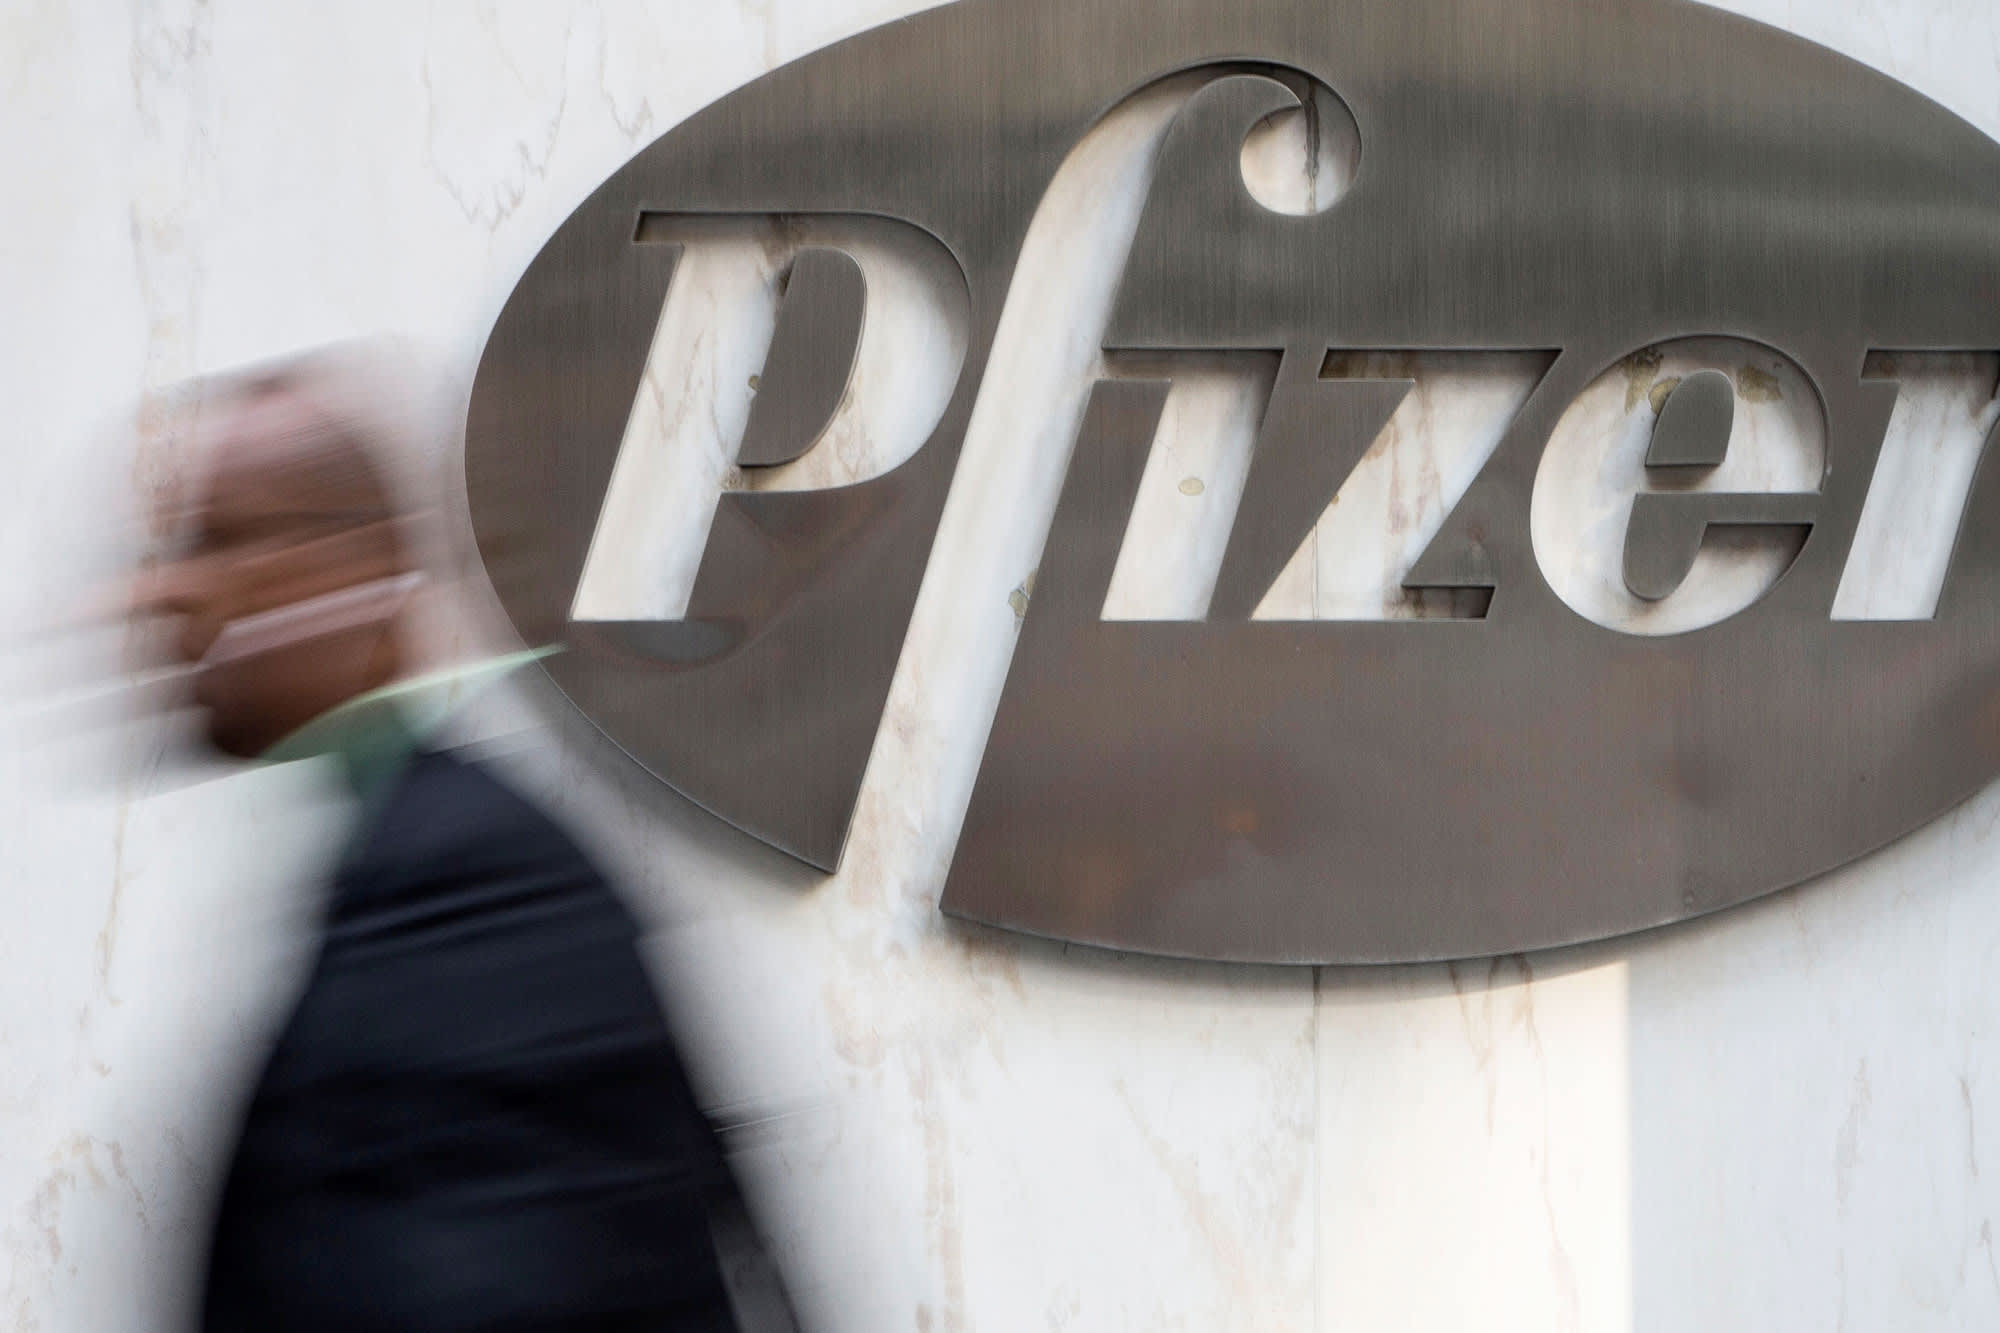 An experimental Covid-19 vaccine being developed by the drug giant Pfizer and the biotech firm BioNTech spurred immune responses in healthy patients, 